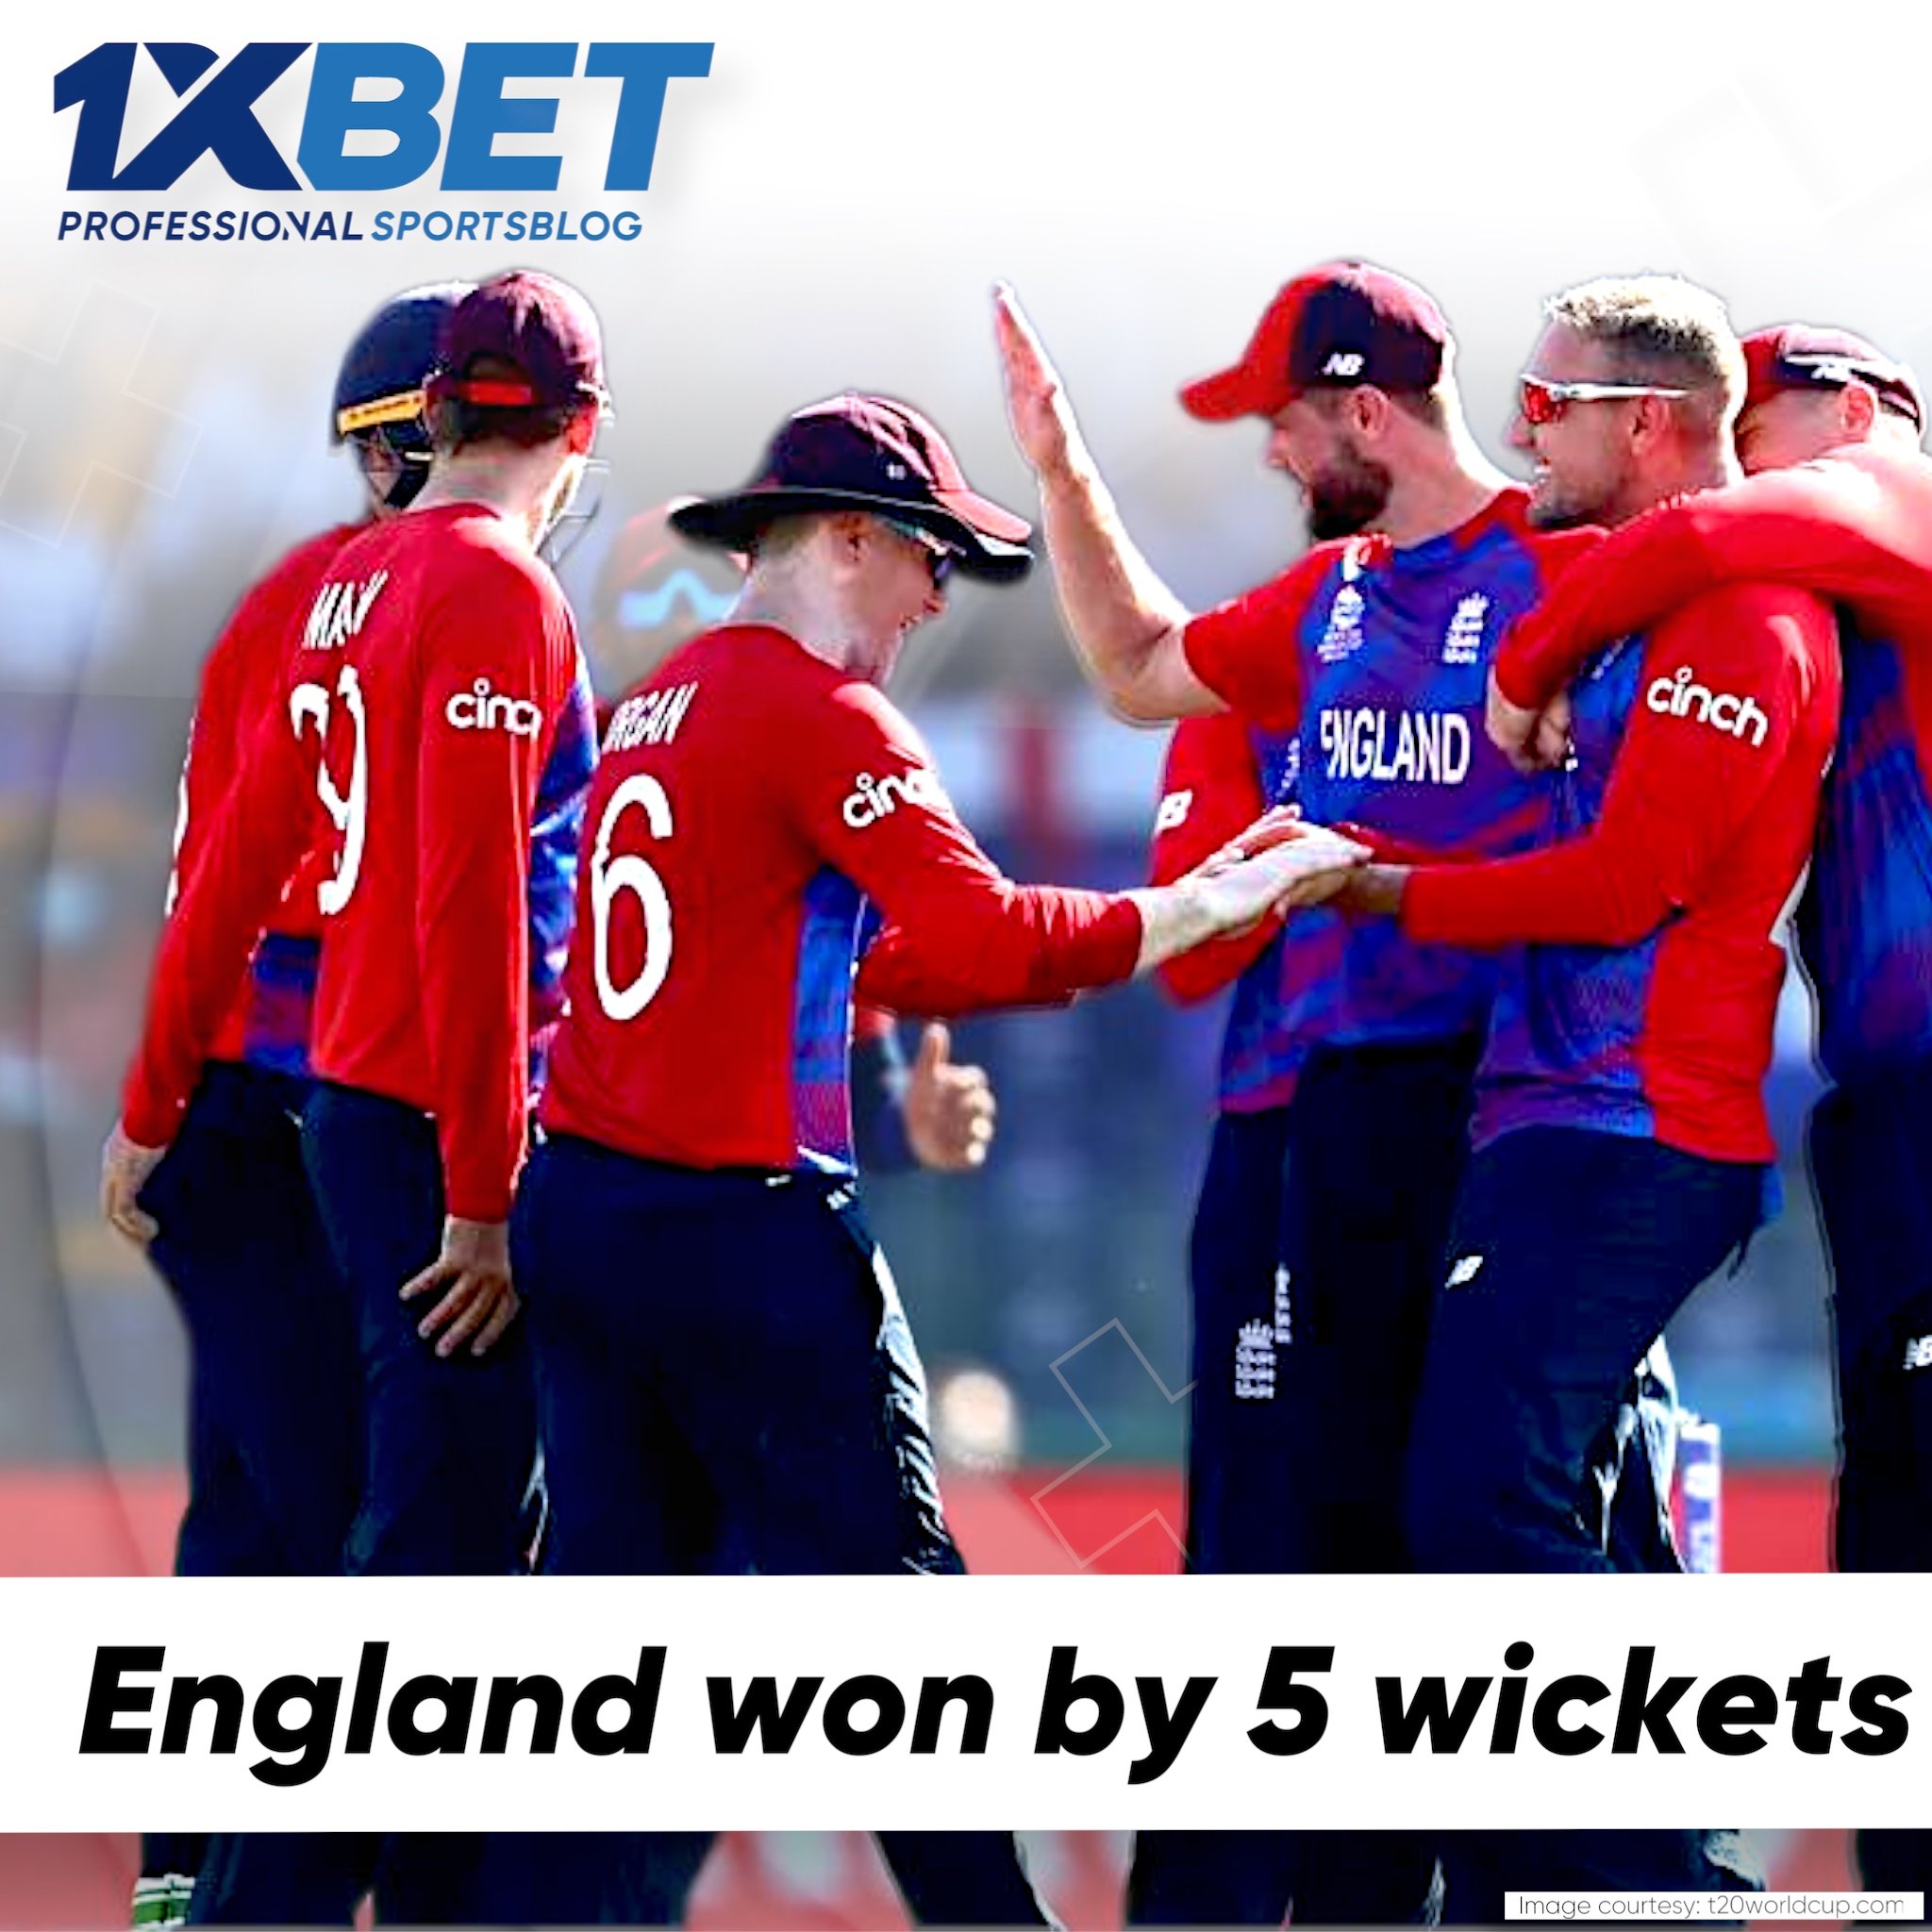 England won by 5 wickets